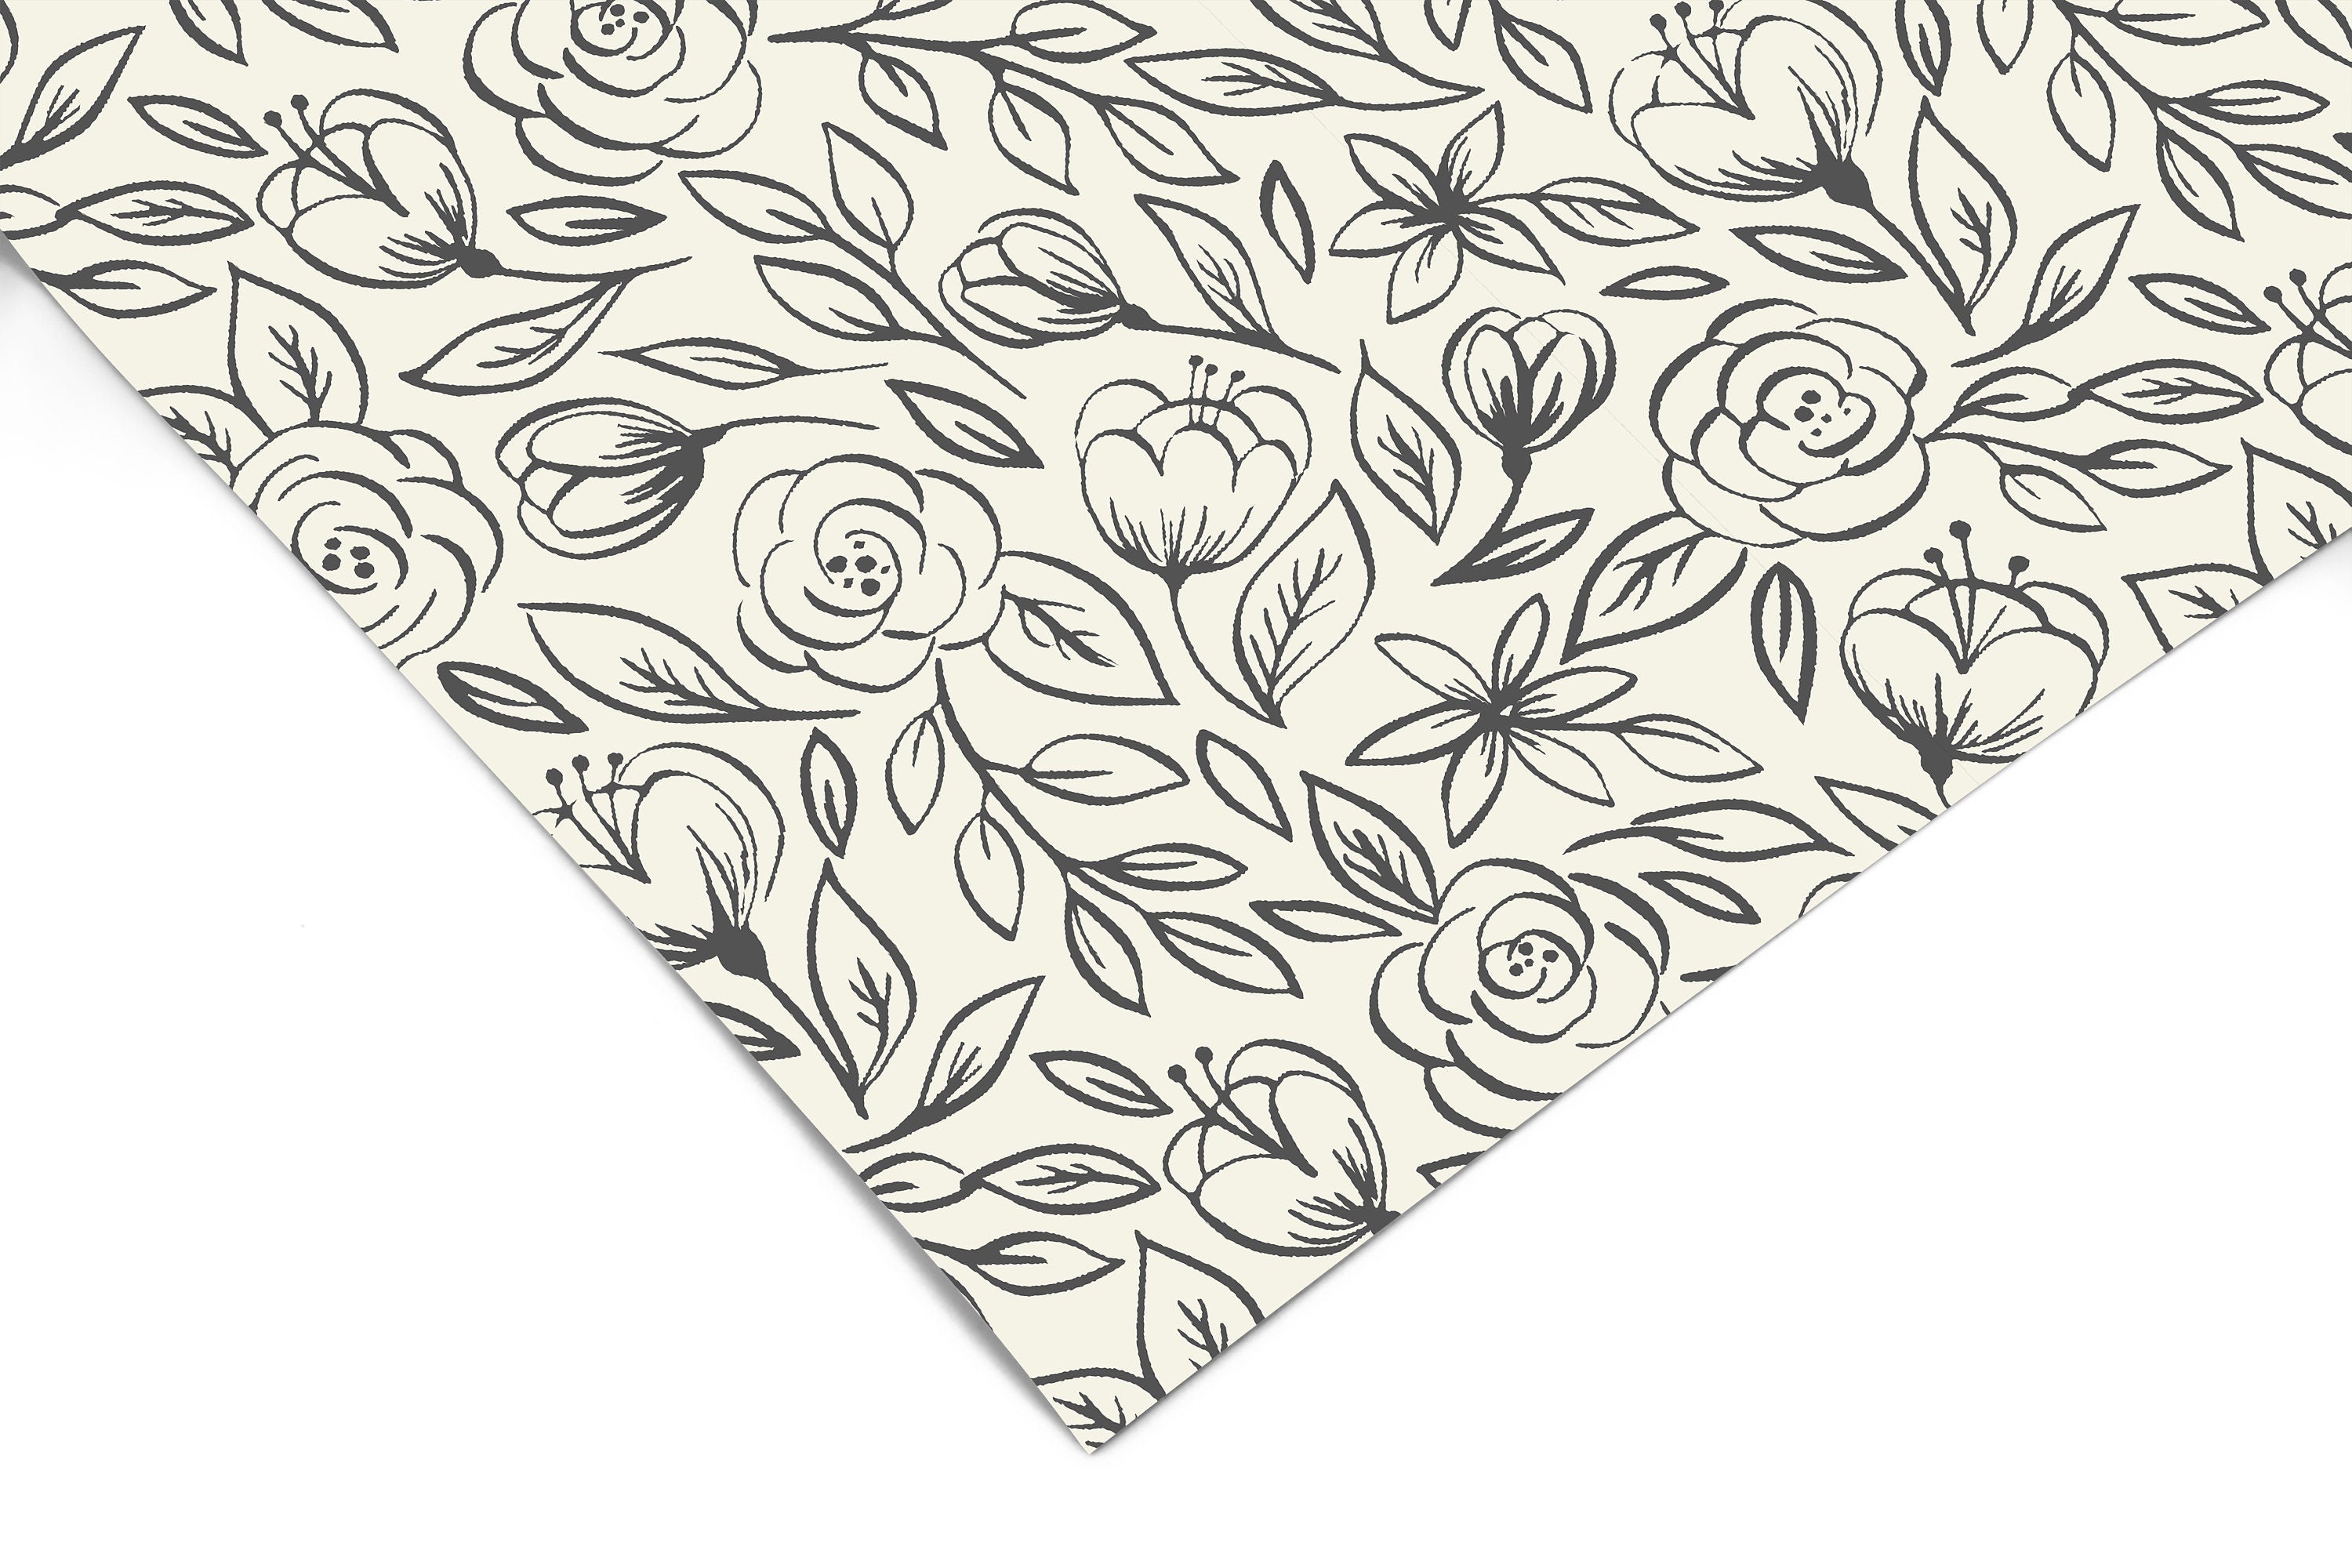 Black Cream Rose Contact Paper | Peel And Stick Wallpaper | Removable Wallpaper | Shelf Liner | Drawer Liner | Peel and Stick Paper 477 - JamesAndColors